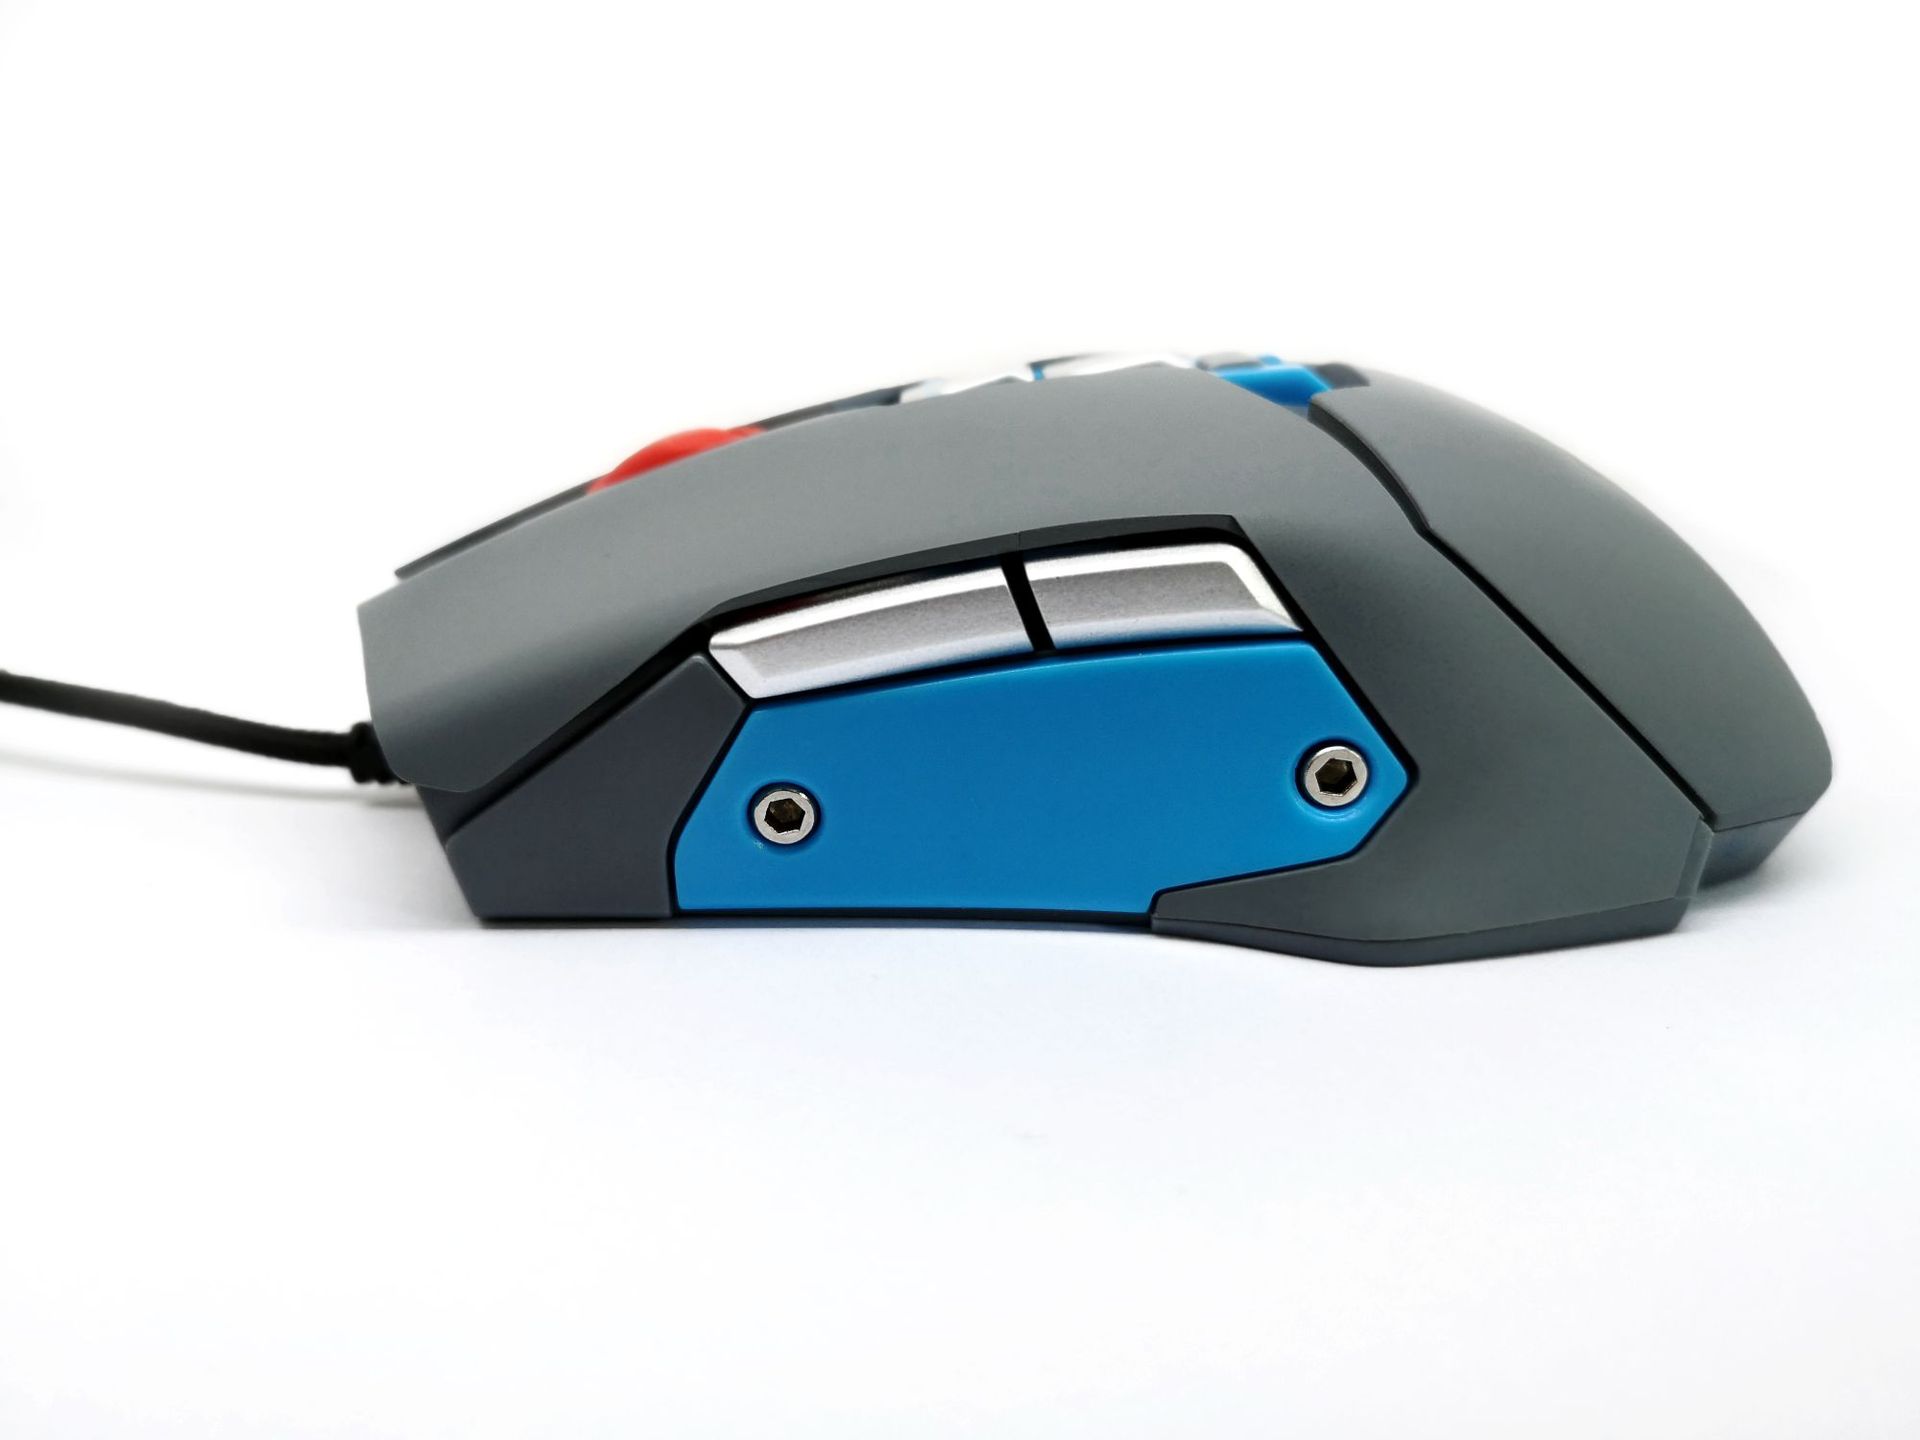 iKKEGOL 9 Programmable Buttons USB Gaming Mouse with Speaker Mic